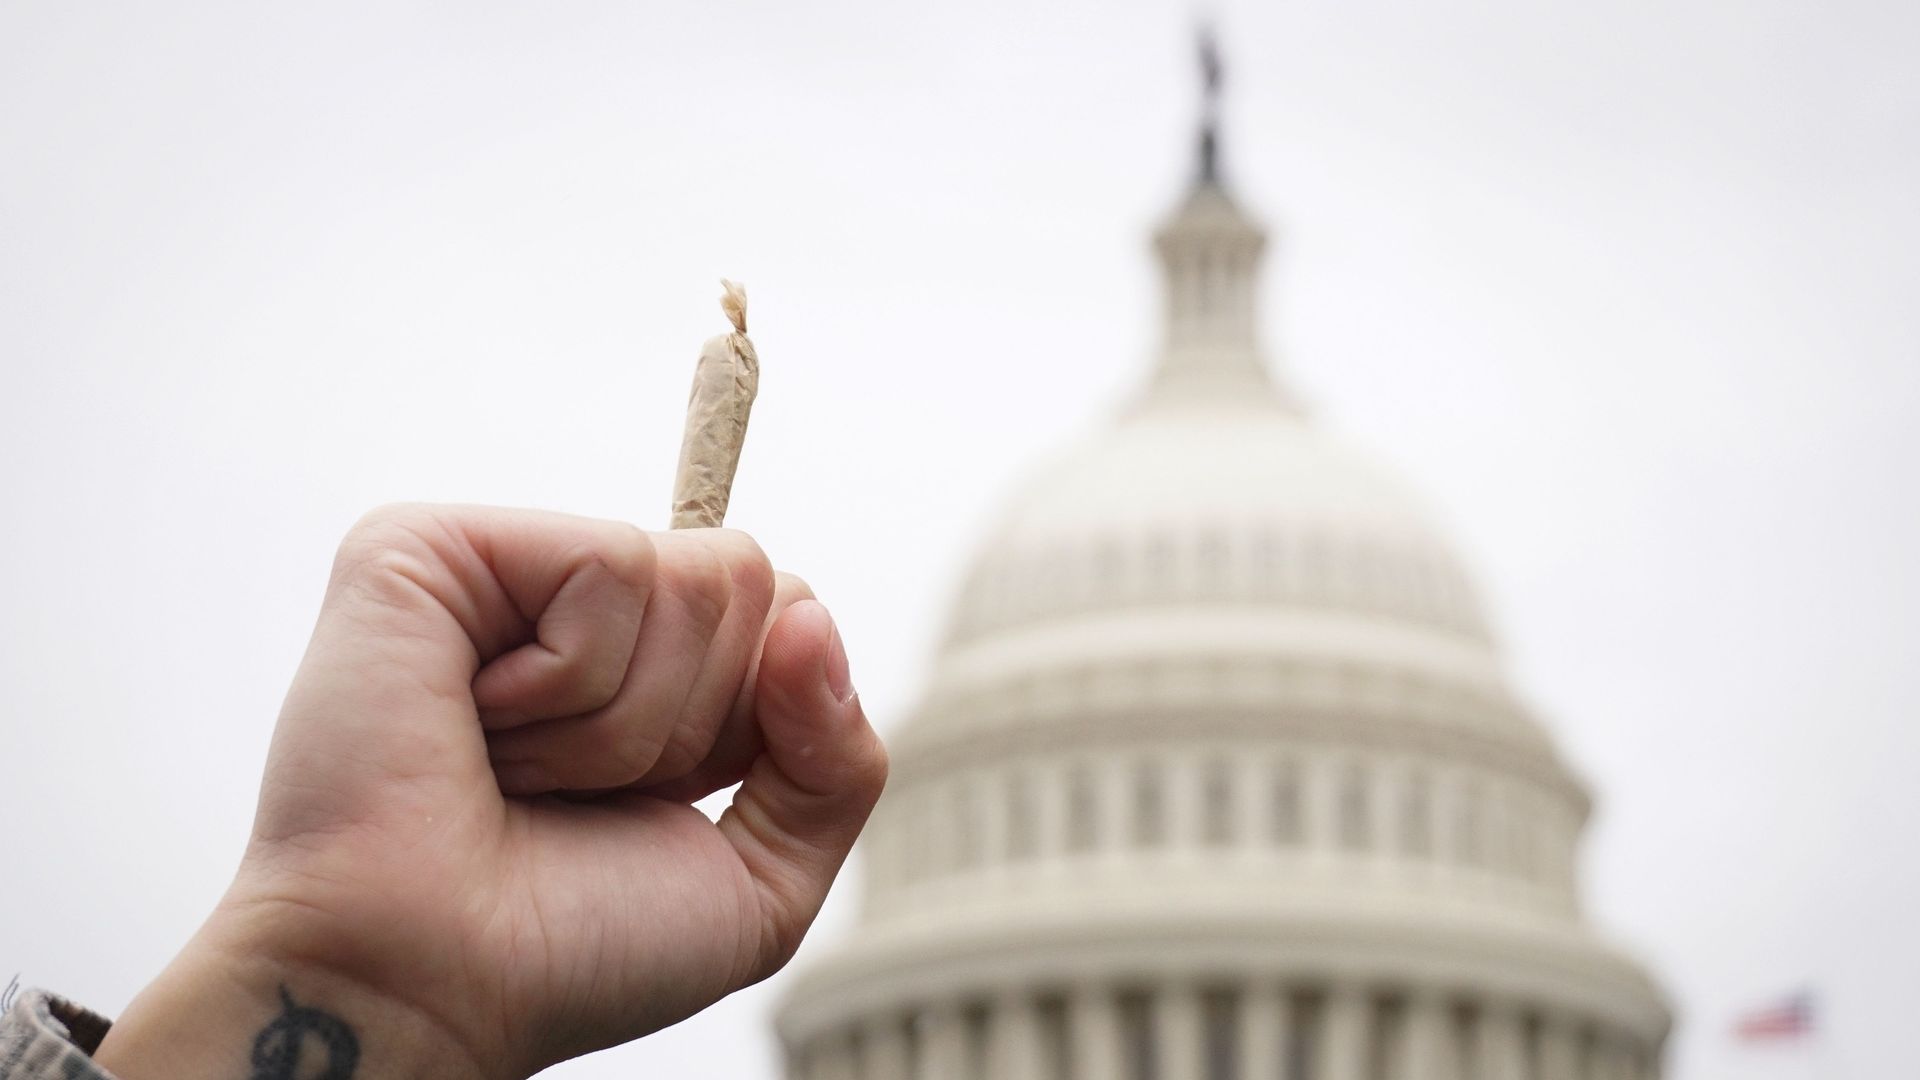 A pro-cannabis activist holds up a marijuana cigarette during a rally on Capitol Hill on April 24, 2017